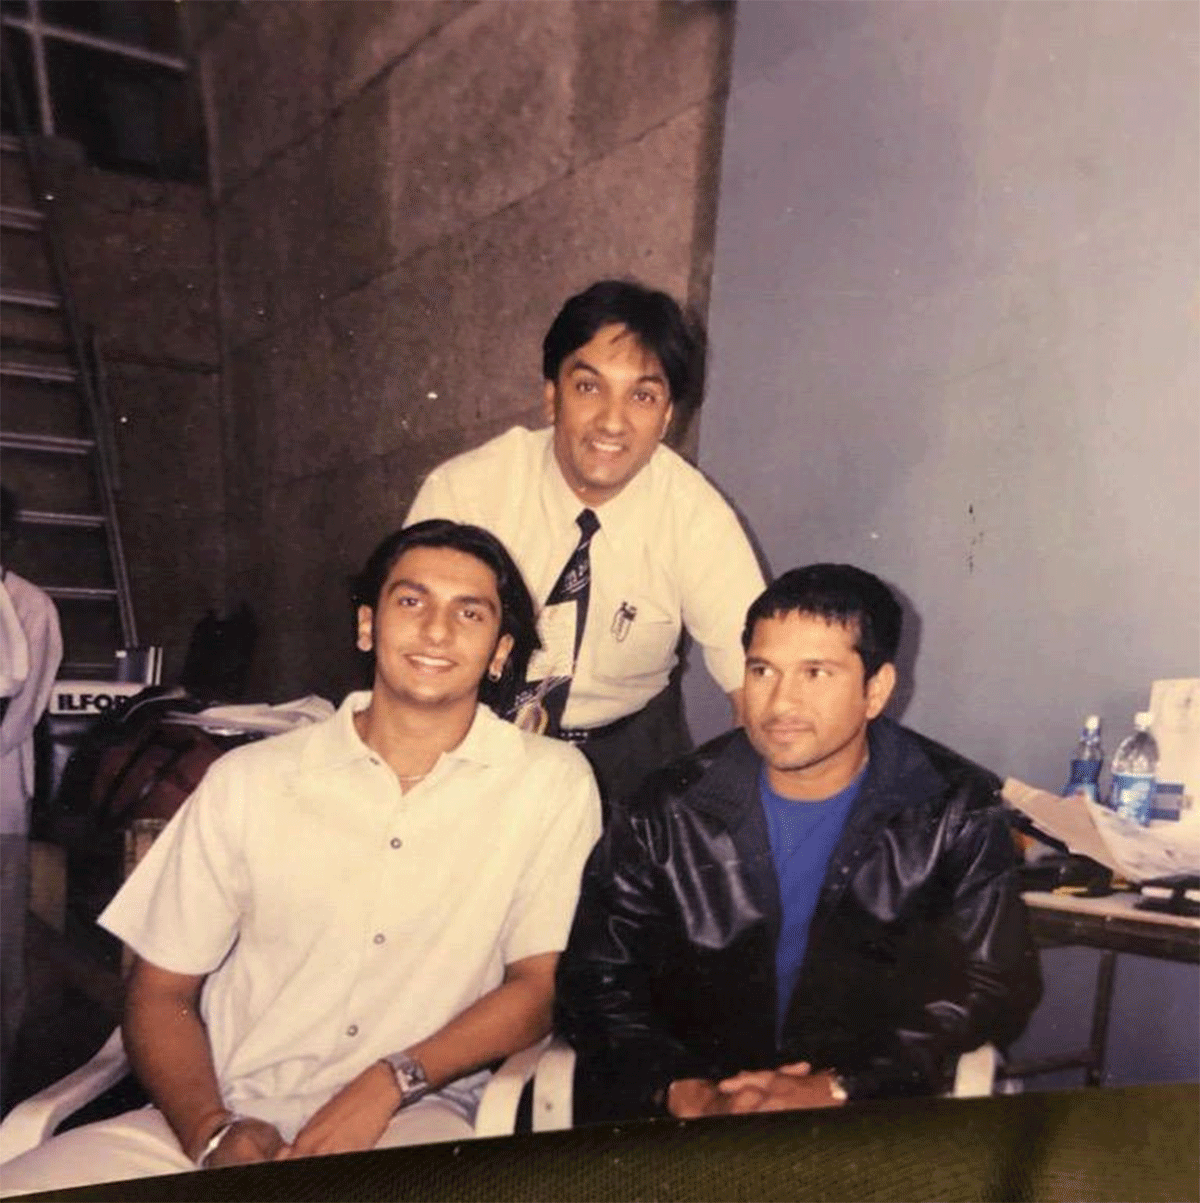 Sachin Tendulkar posted this throwback photo along with a wish for birthday boy Ranveer Singh